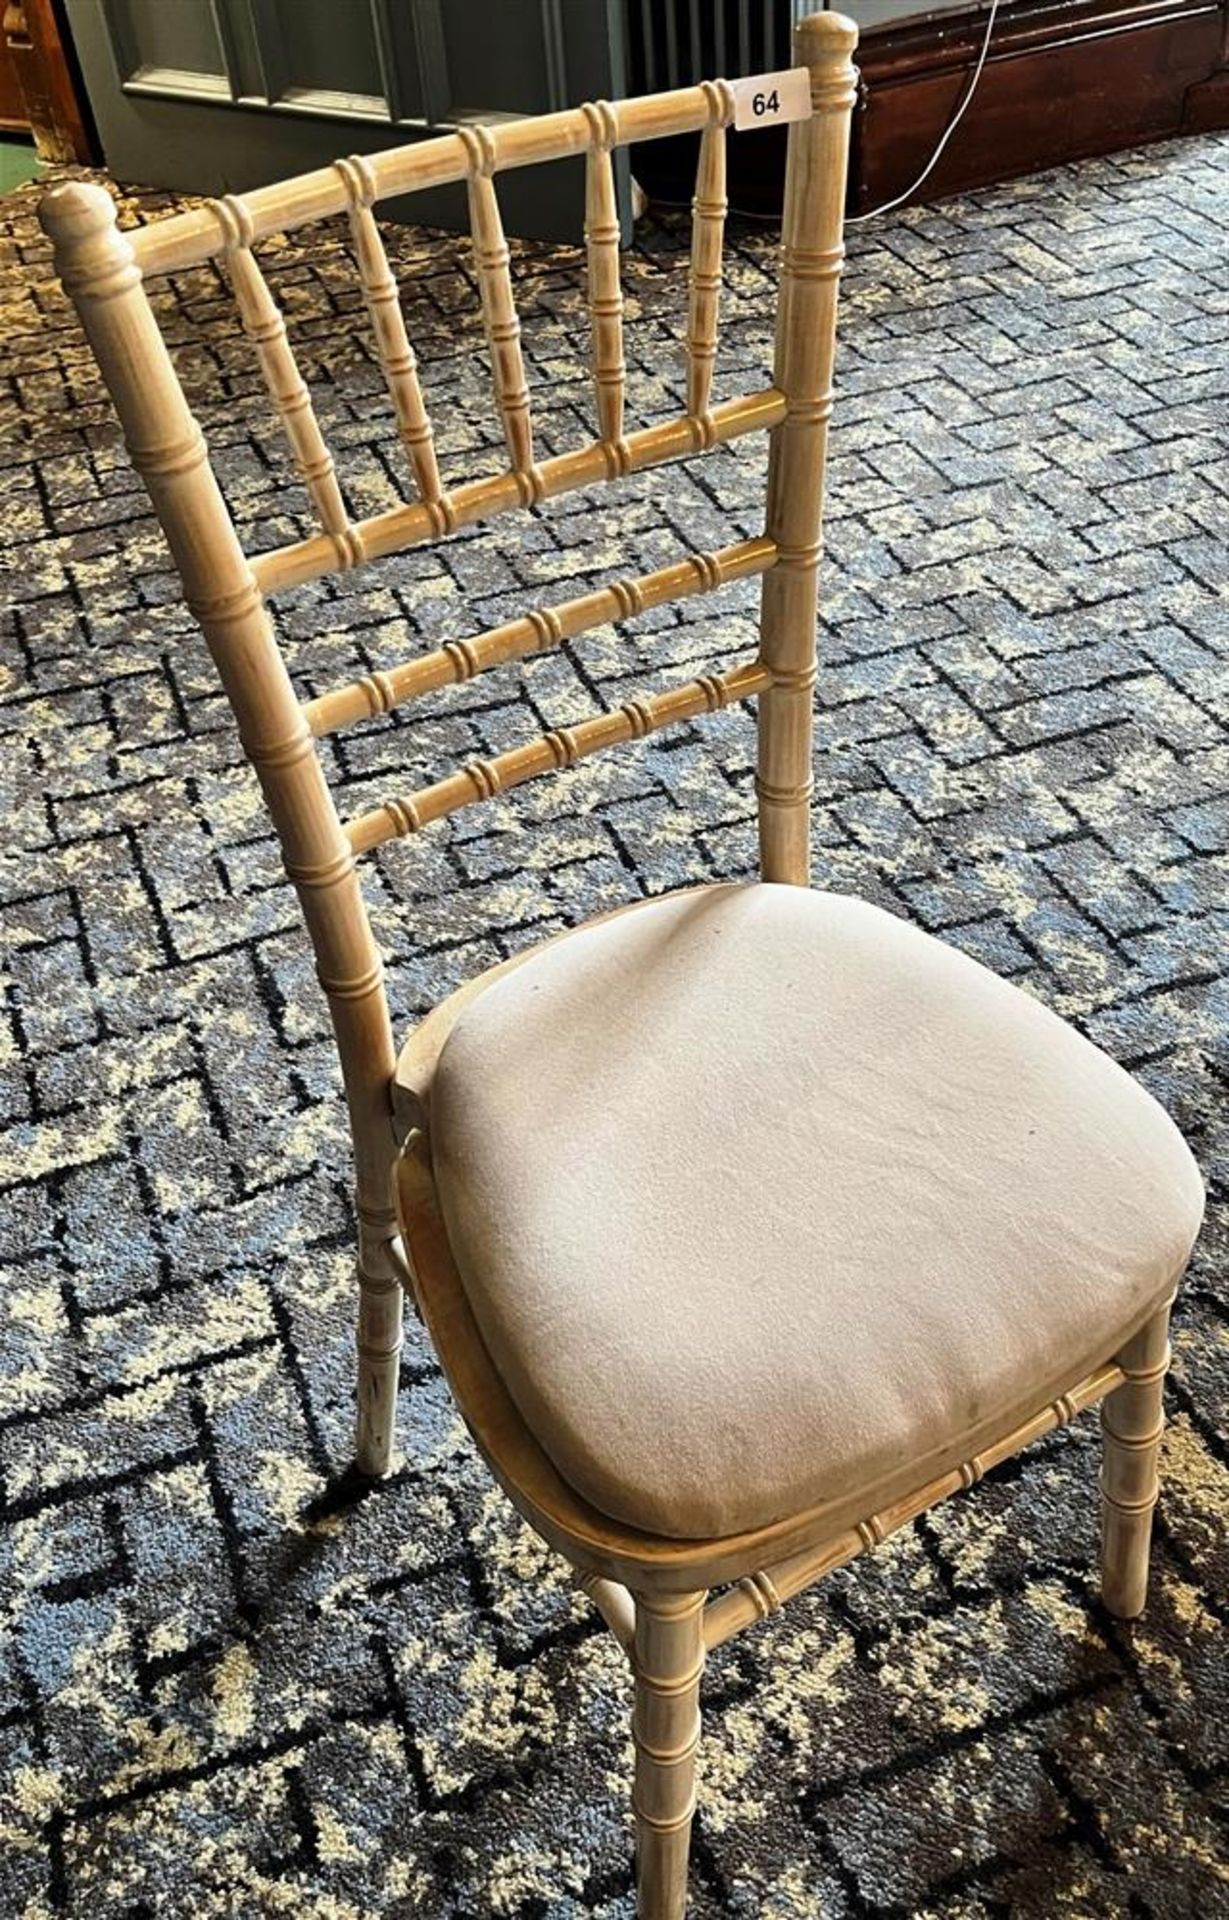 A QUANTITY OF WHITE STACKING CHAIRS - Image 2 of 4